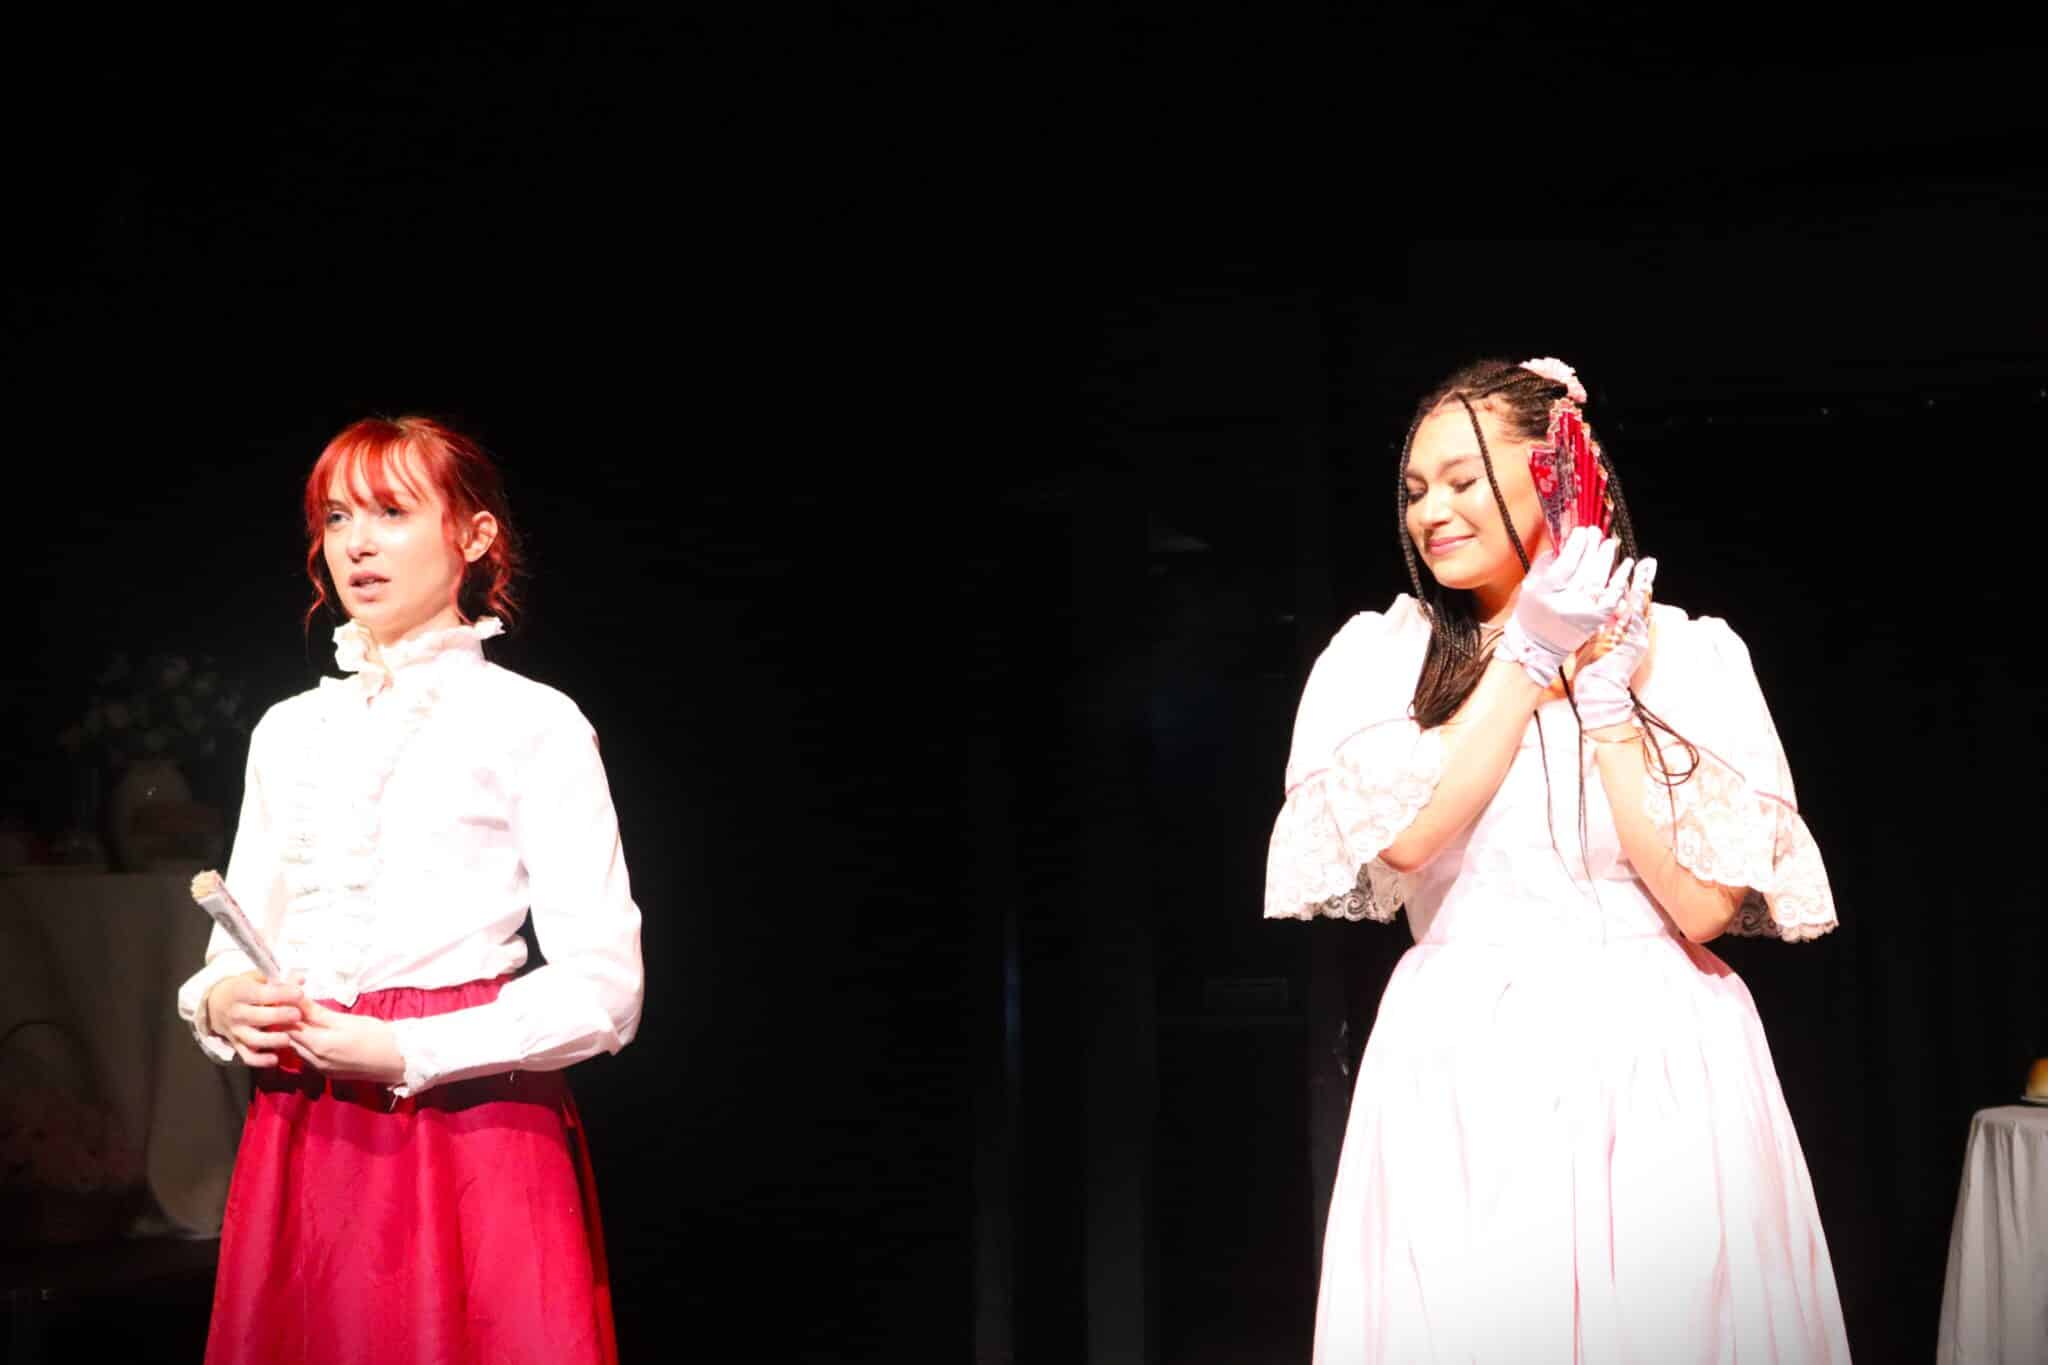 acting students on stage